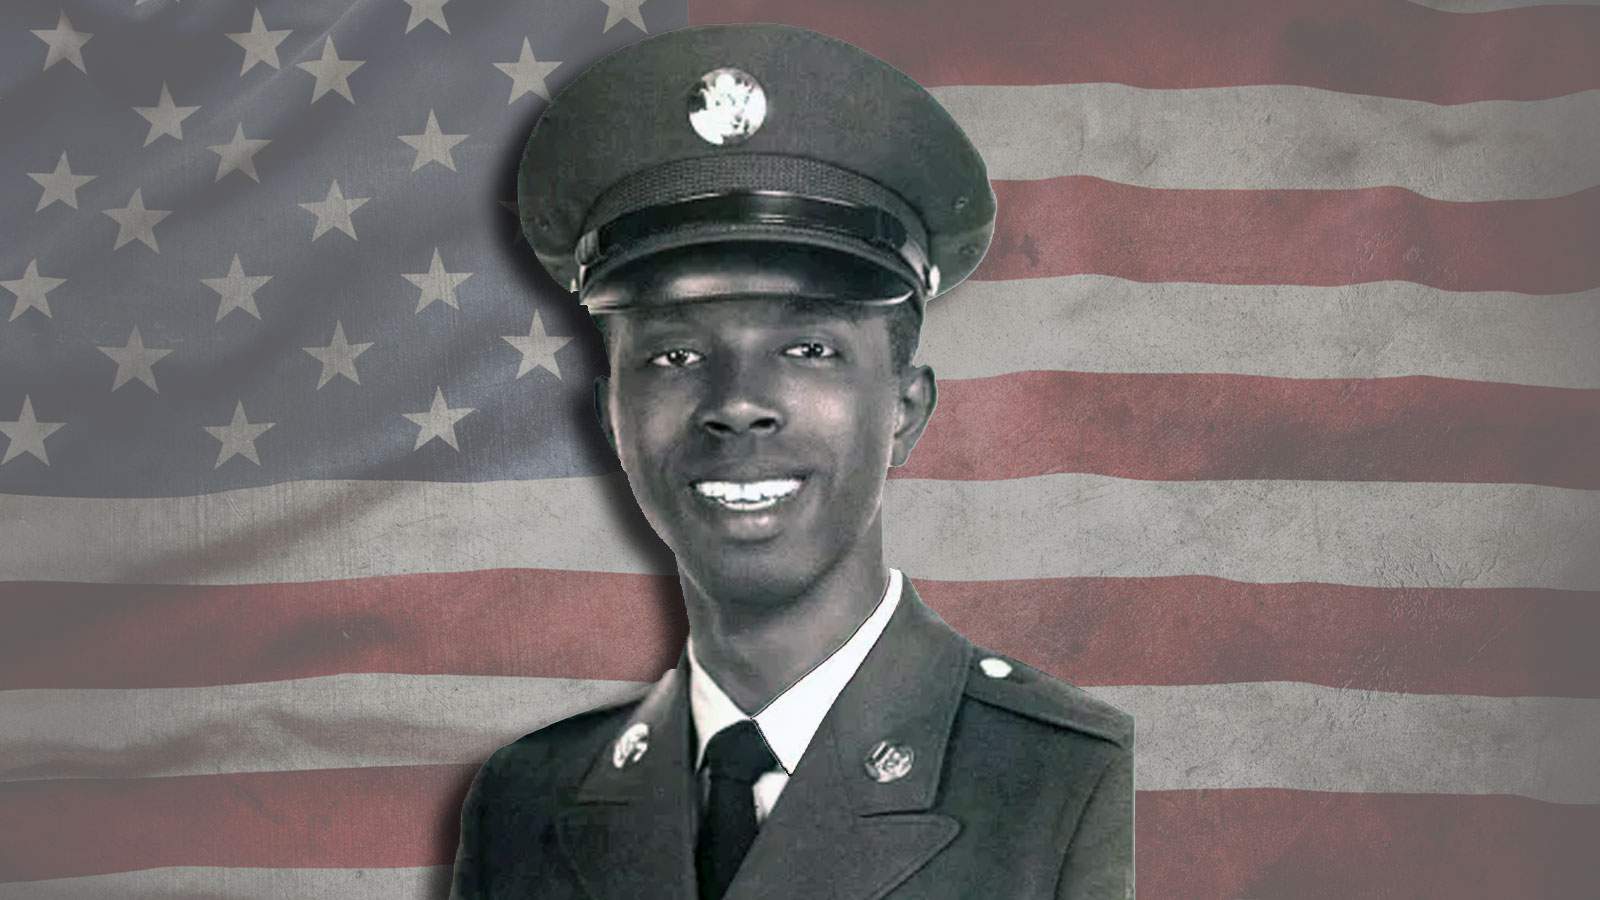 VA clinic to be named for first St. Johns County soldier killed in Vietnam War